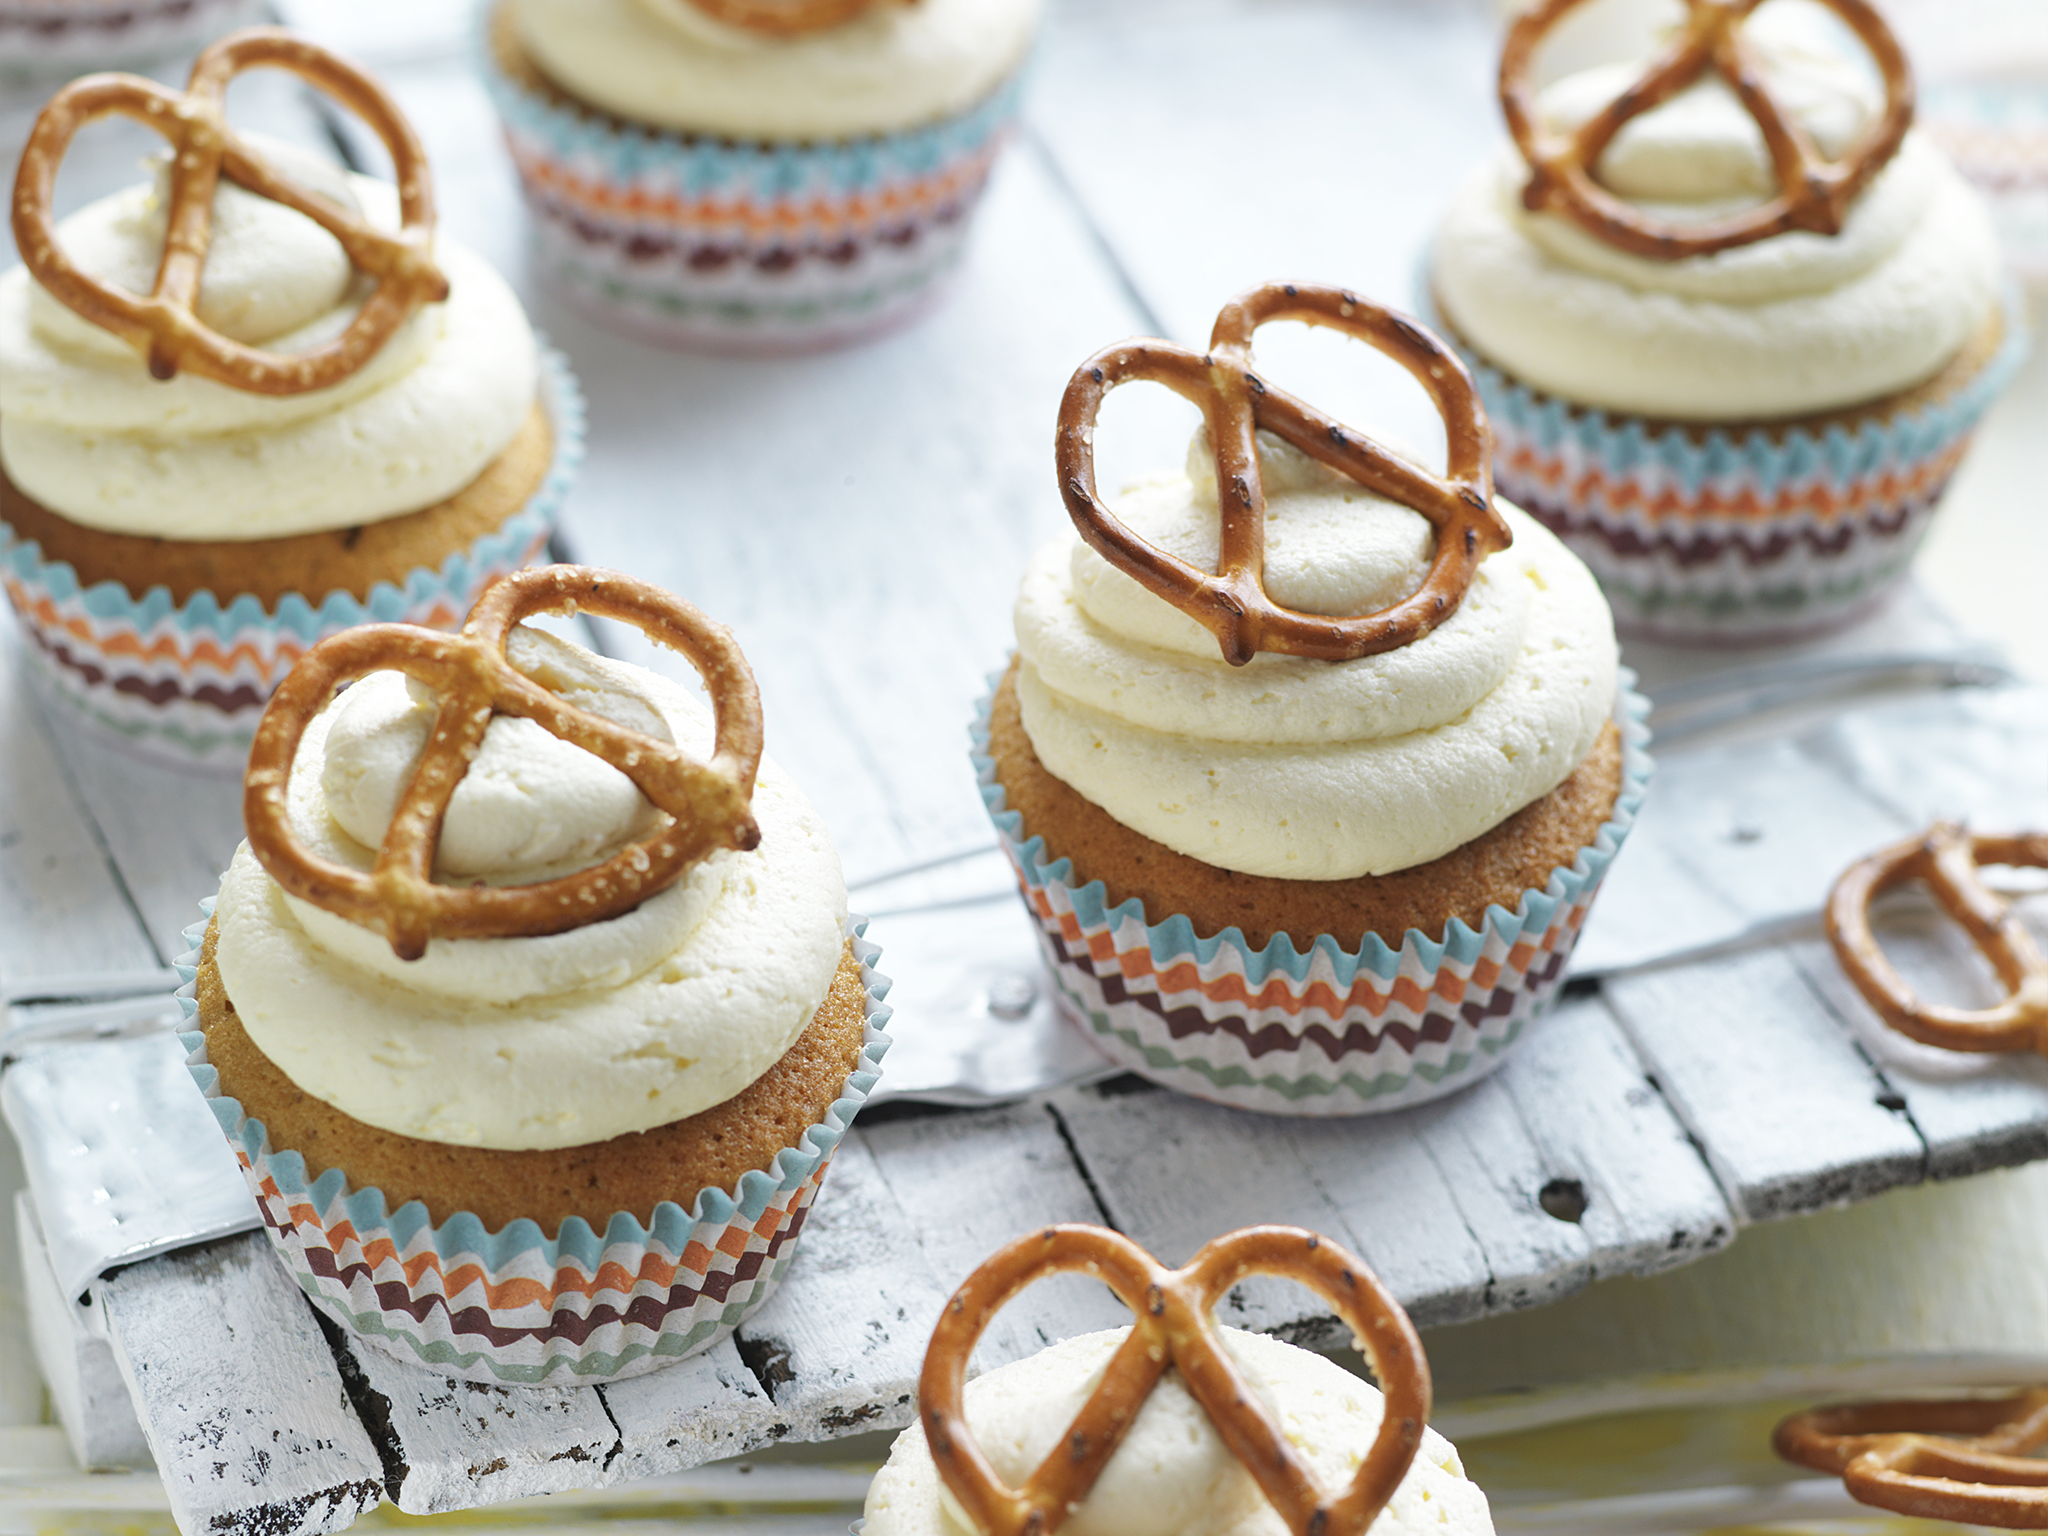 Beer and pretzel cakes with coffee cream